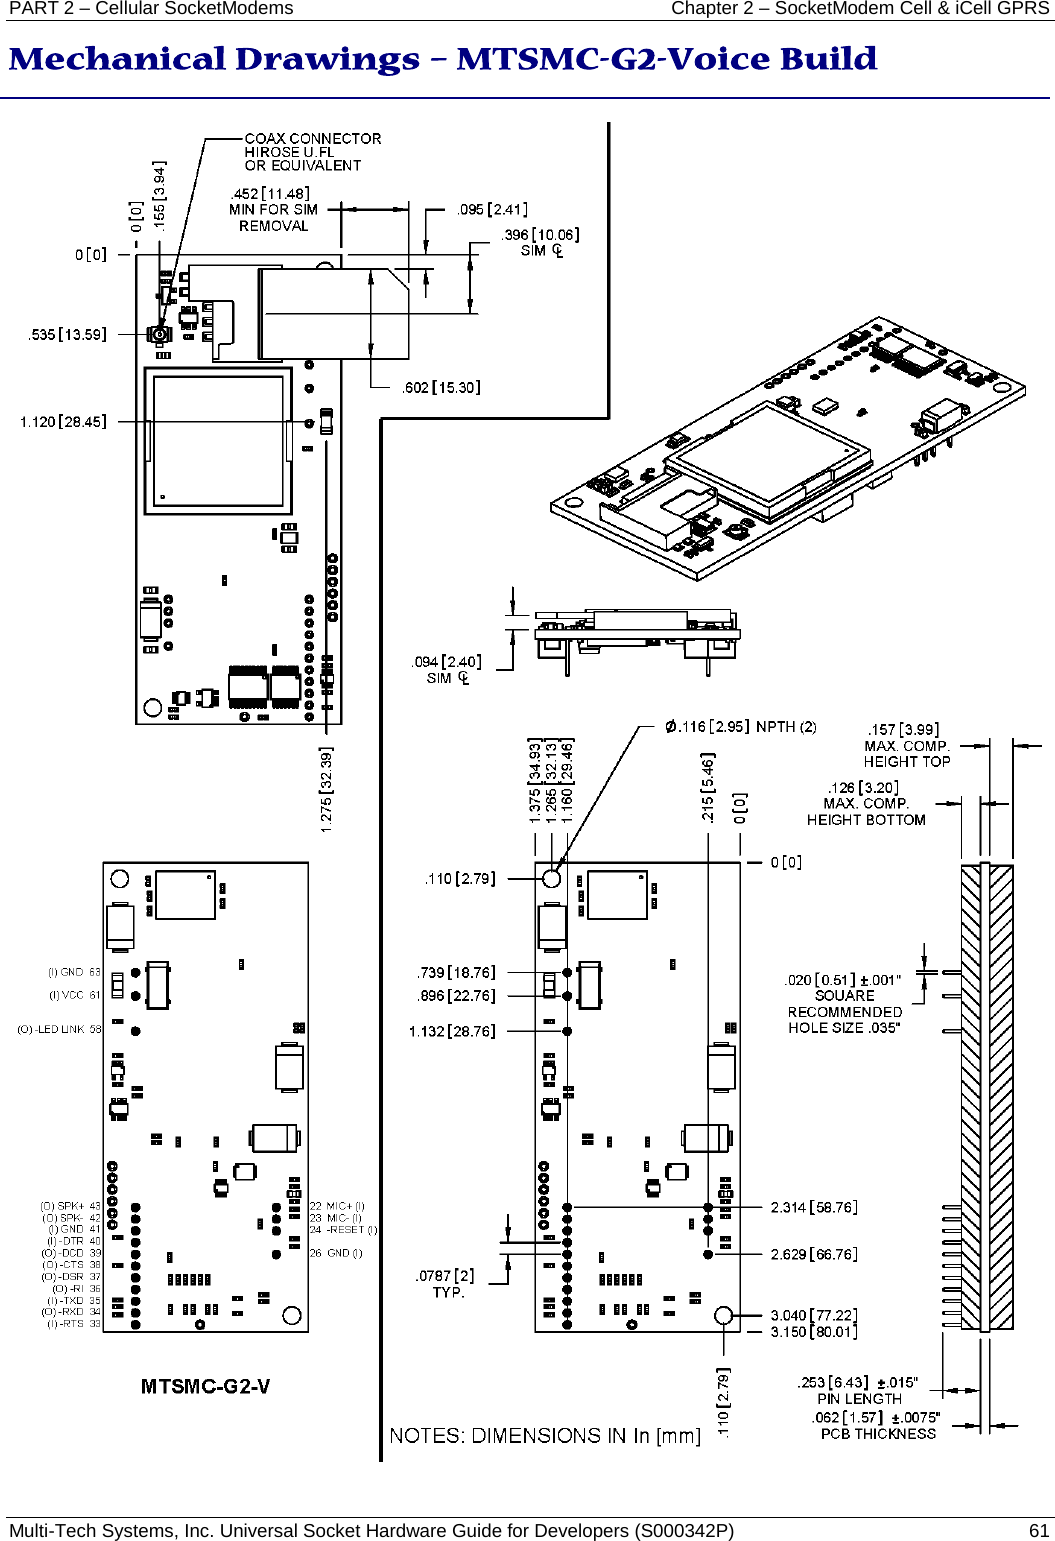 PART 2 – Cellular SocketModems  Chapter 2 – SocketModem Cell &amp; iCell GPRS Multi-Tech Systems, Inc. Universal Socket Hardware Guide for Developers (S000342P)  61   Mechanical Drawings – MTSMC-G2-Voice Build  